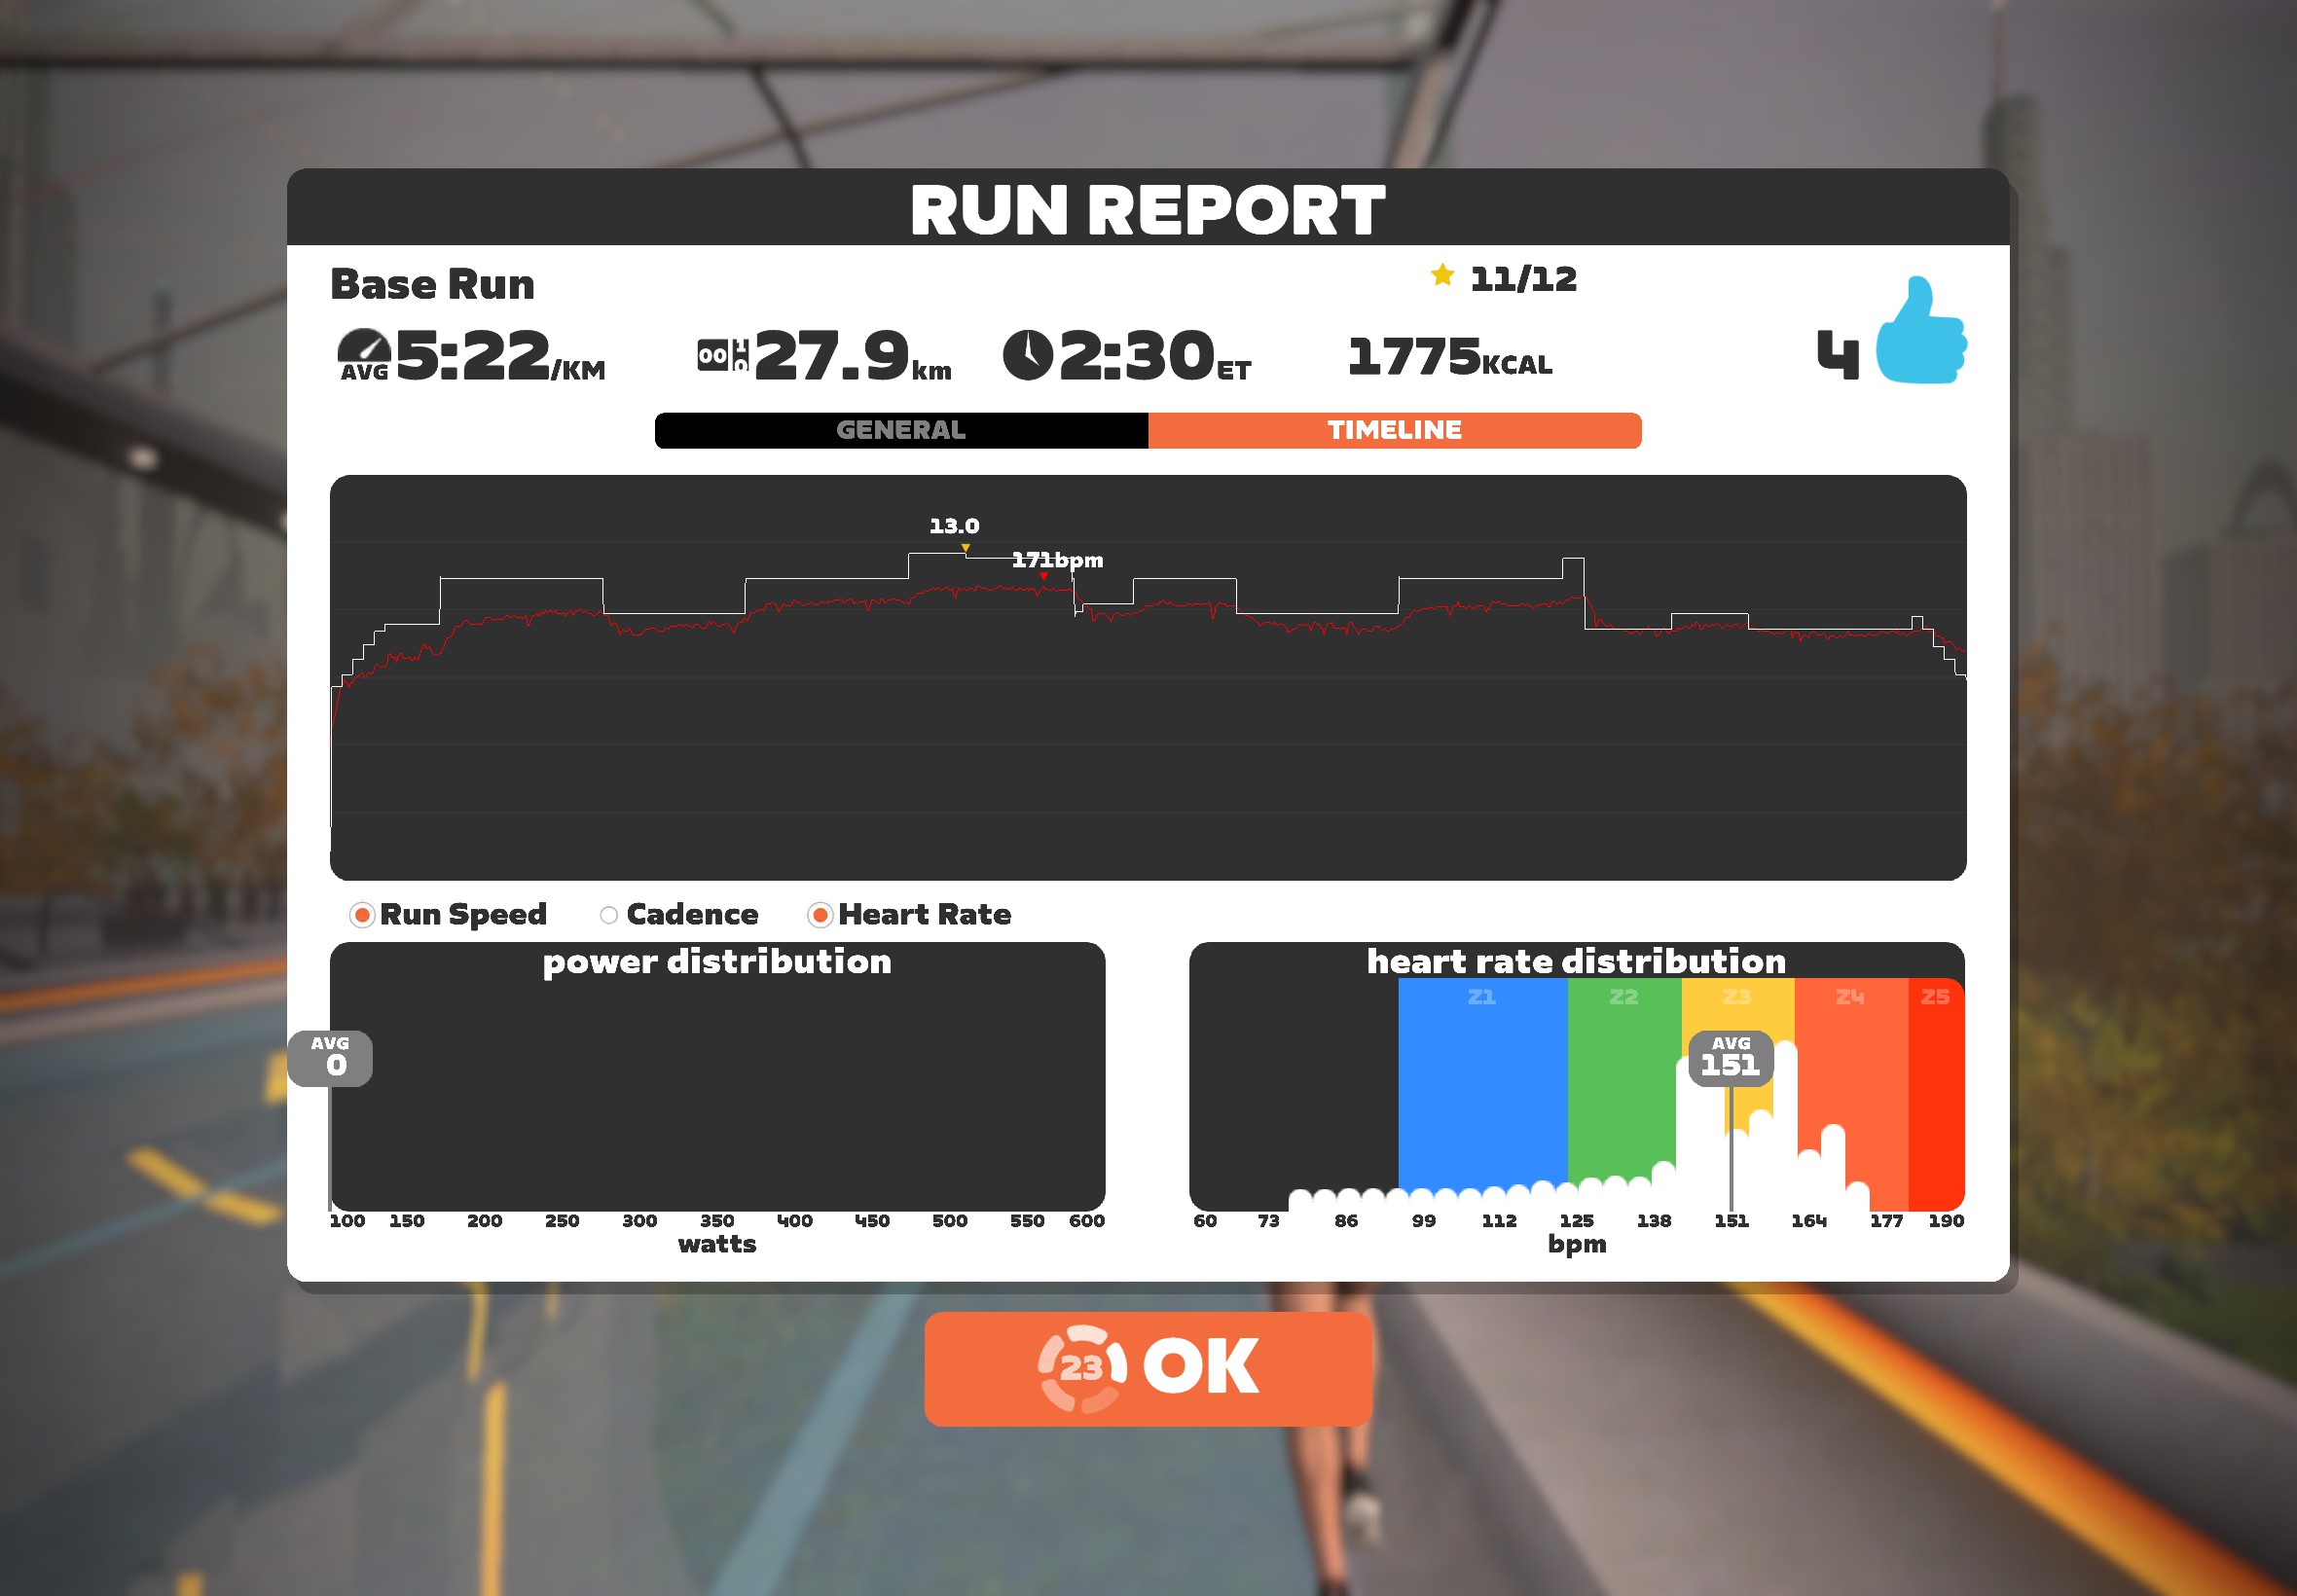 A screenshot of a post-workout "run report" in Zwift, showing pace, distance, elapsed time, calories, ride-ons, and graphs for speed, heart rate distribution, and power.